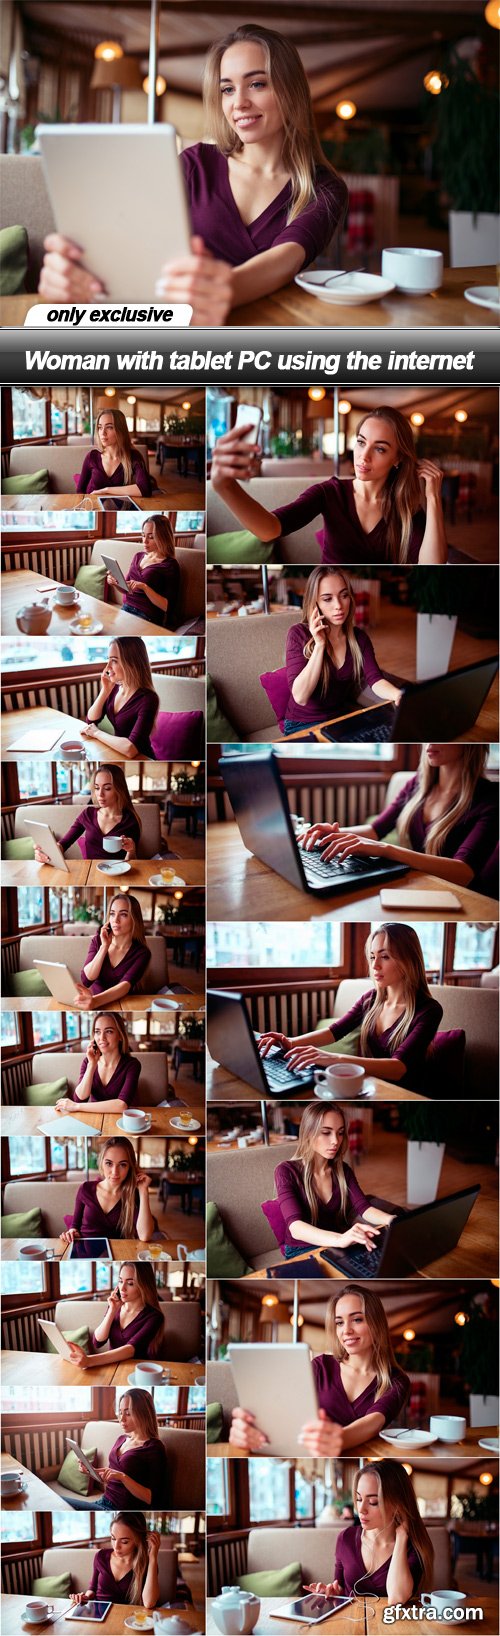 Woman with tablet PC using the internet - 17 UHQ JPEG